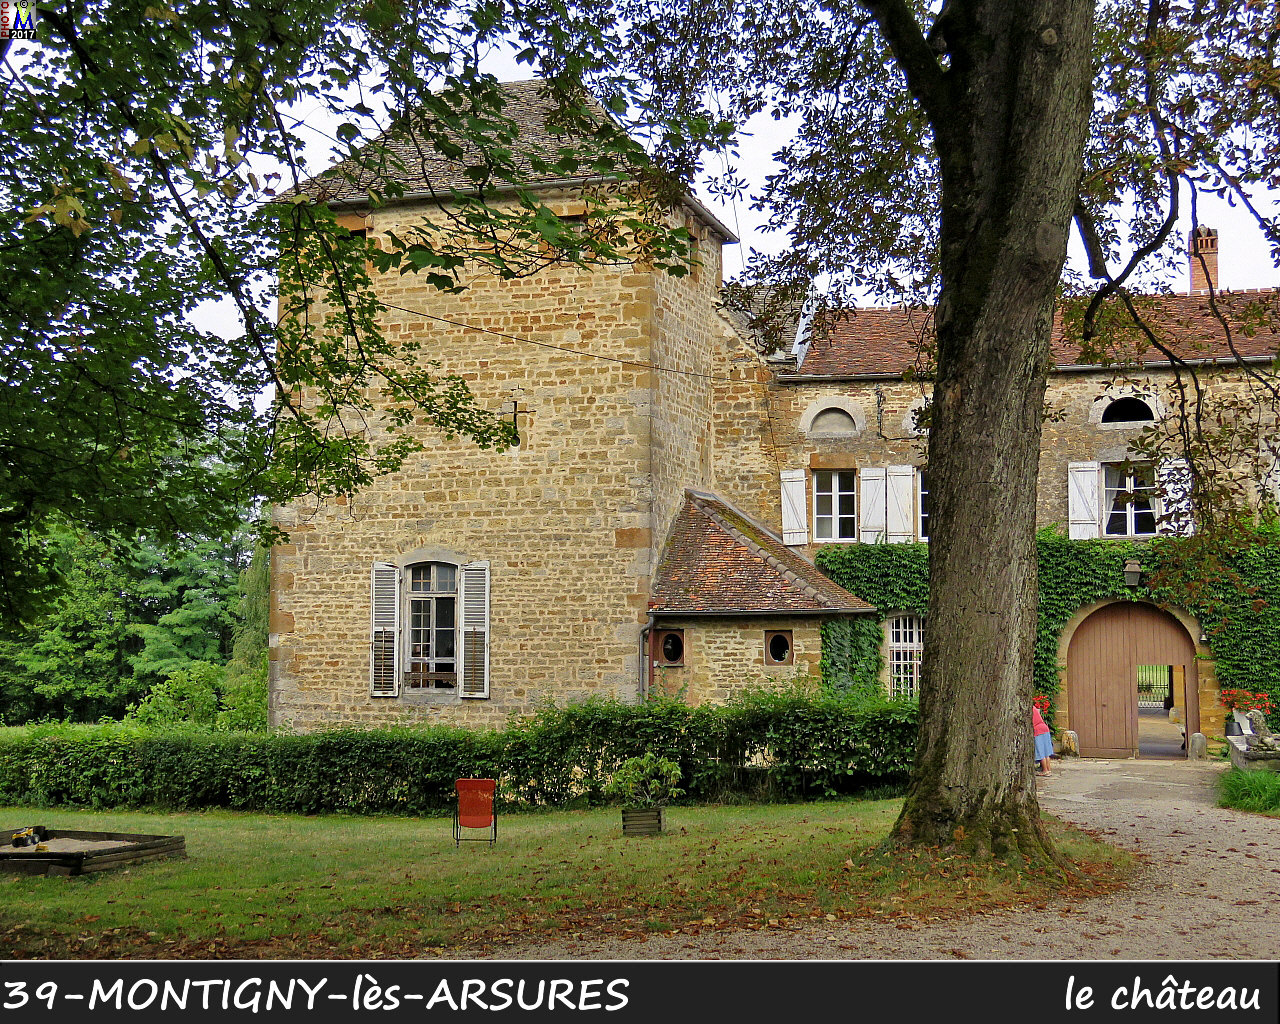 39MONTIGNY-les-ARSURES_chateau_102.jpg